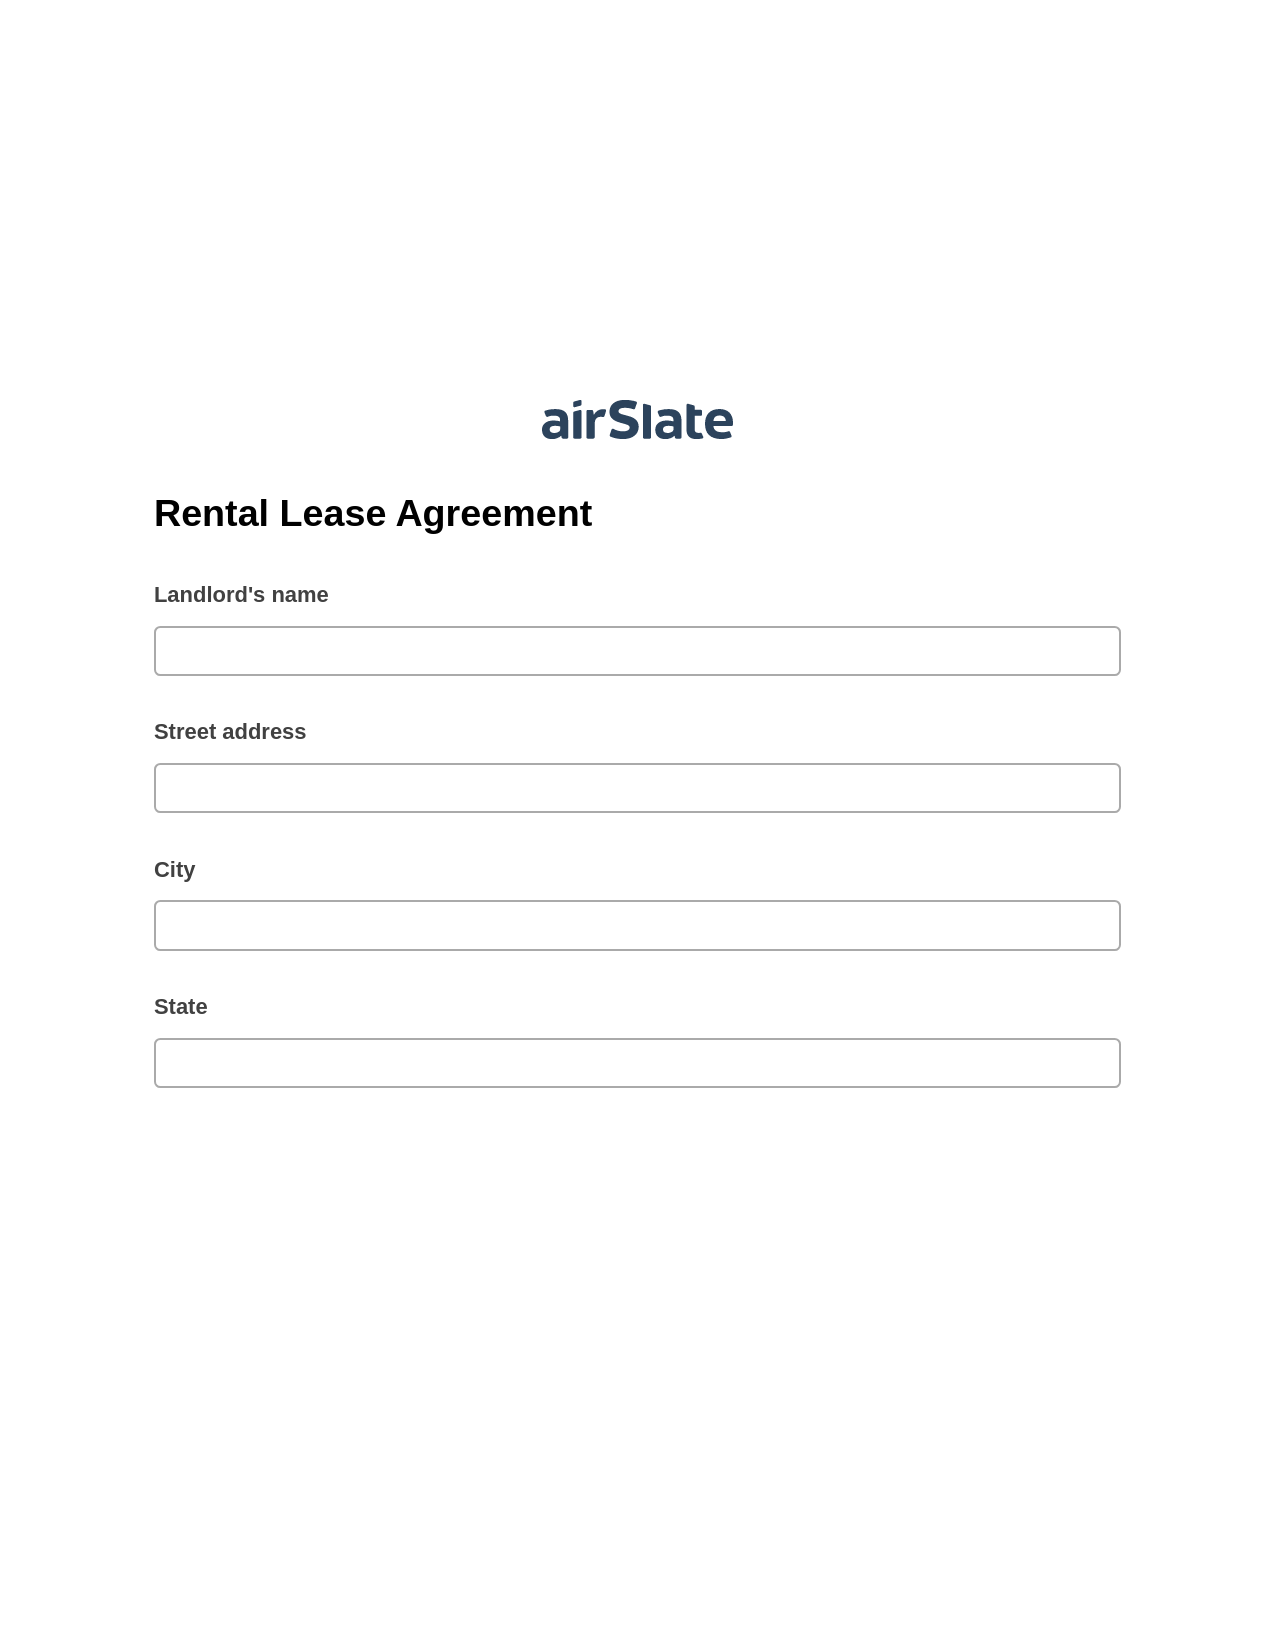 Rental Lease Agreement Pre-fill from Google Sheet Dropdown Options Bot, Update NetSuite Records Bot, Export to Smartsheet